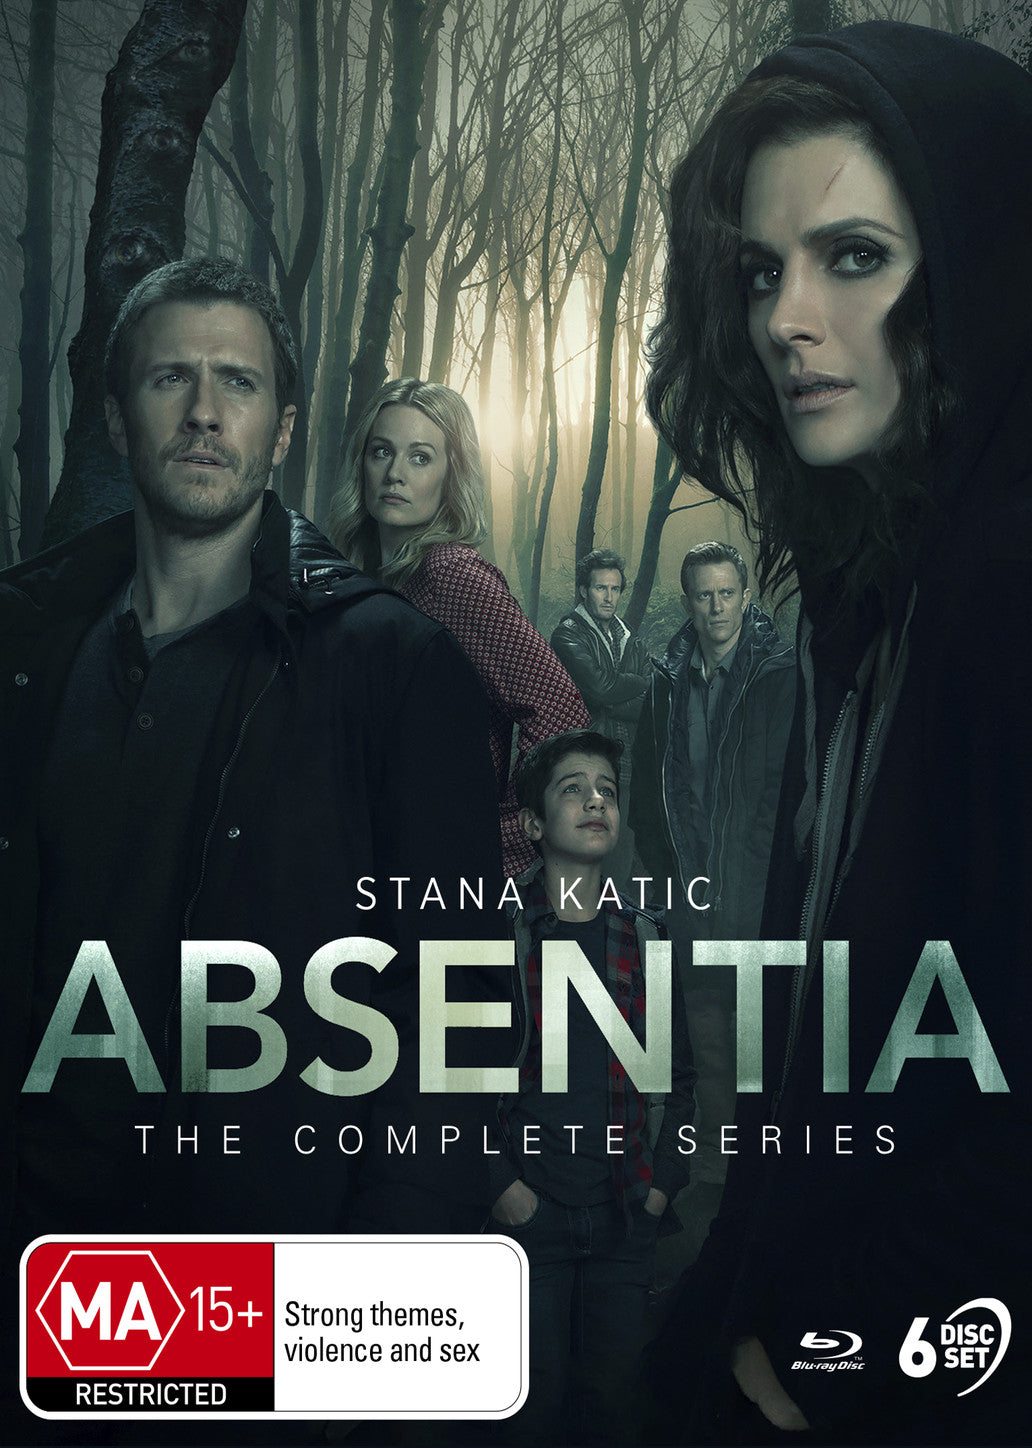 ABSENTIA - THE COMPLETE SERIES (BLU RAY)